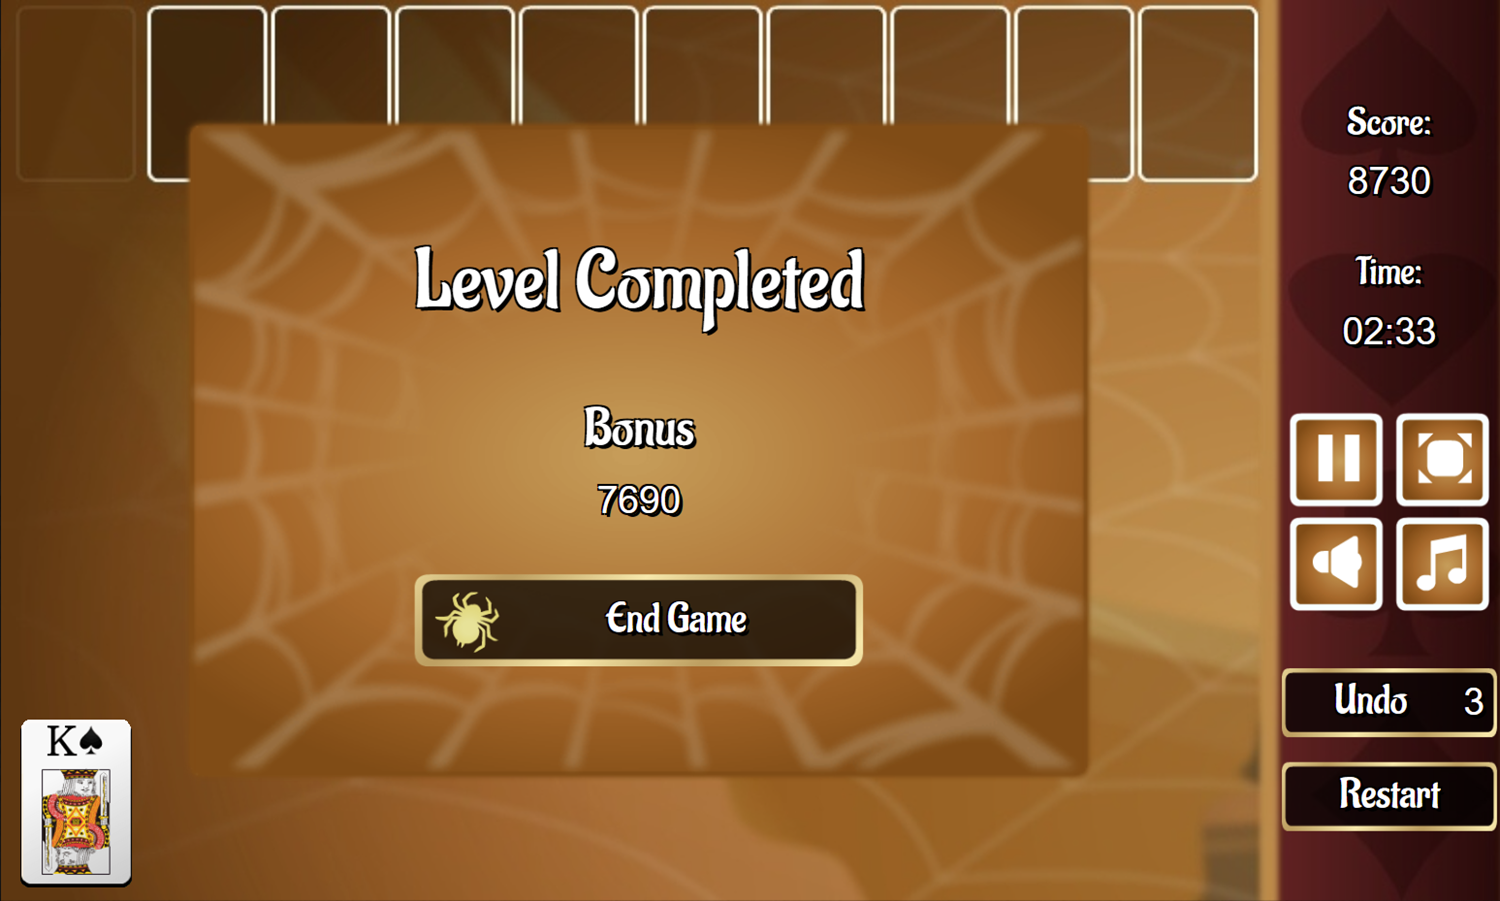 Jumping Spider Solitaire Game Level Completed Screen Screenshot.